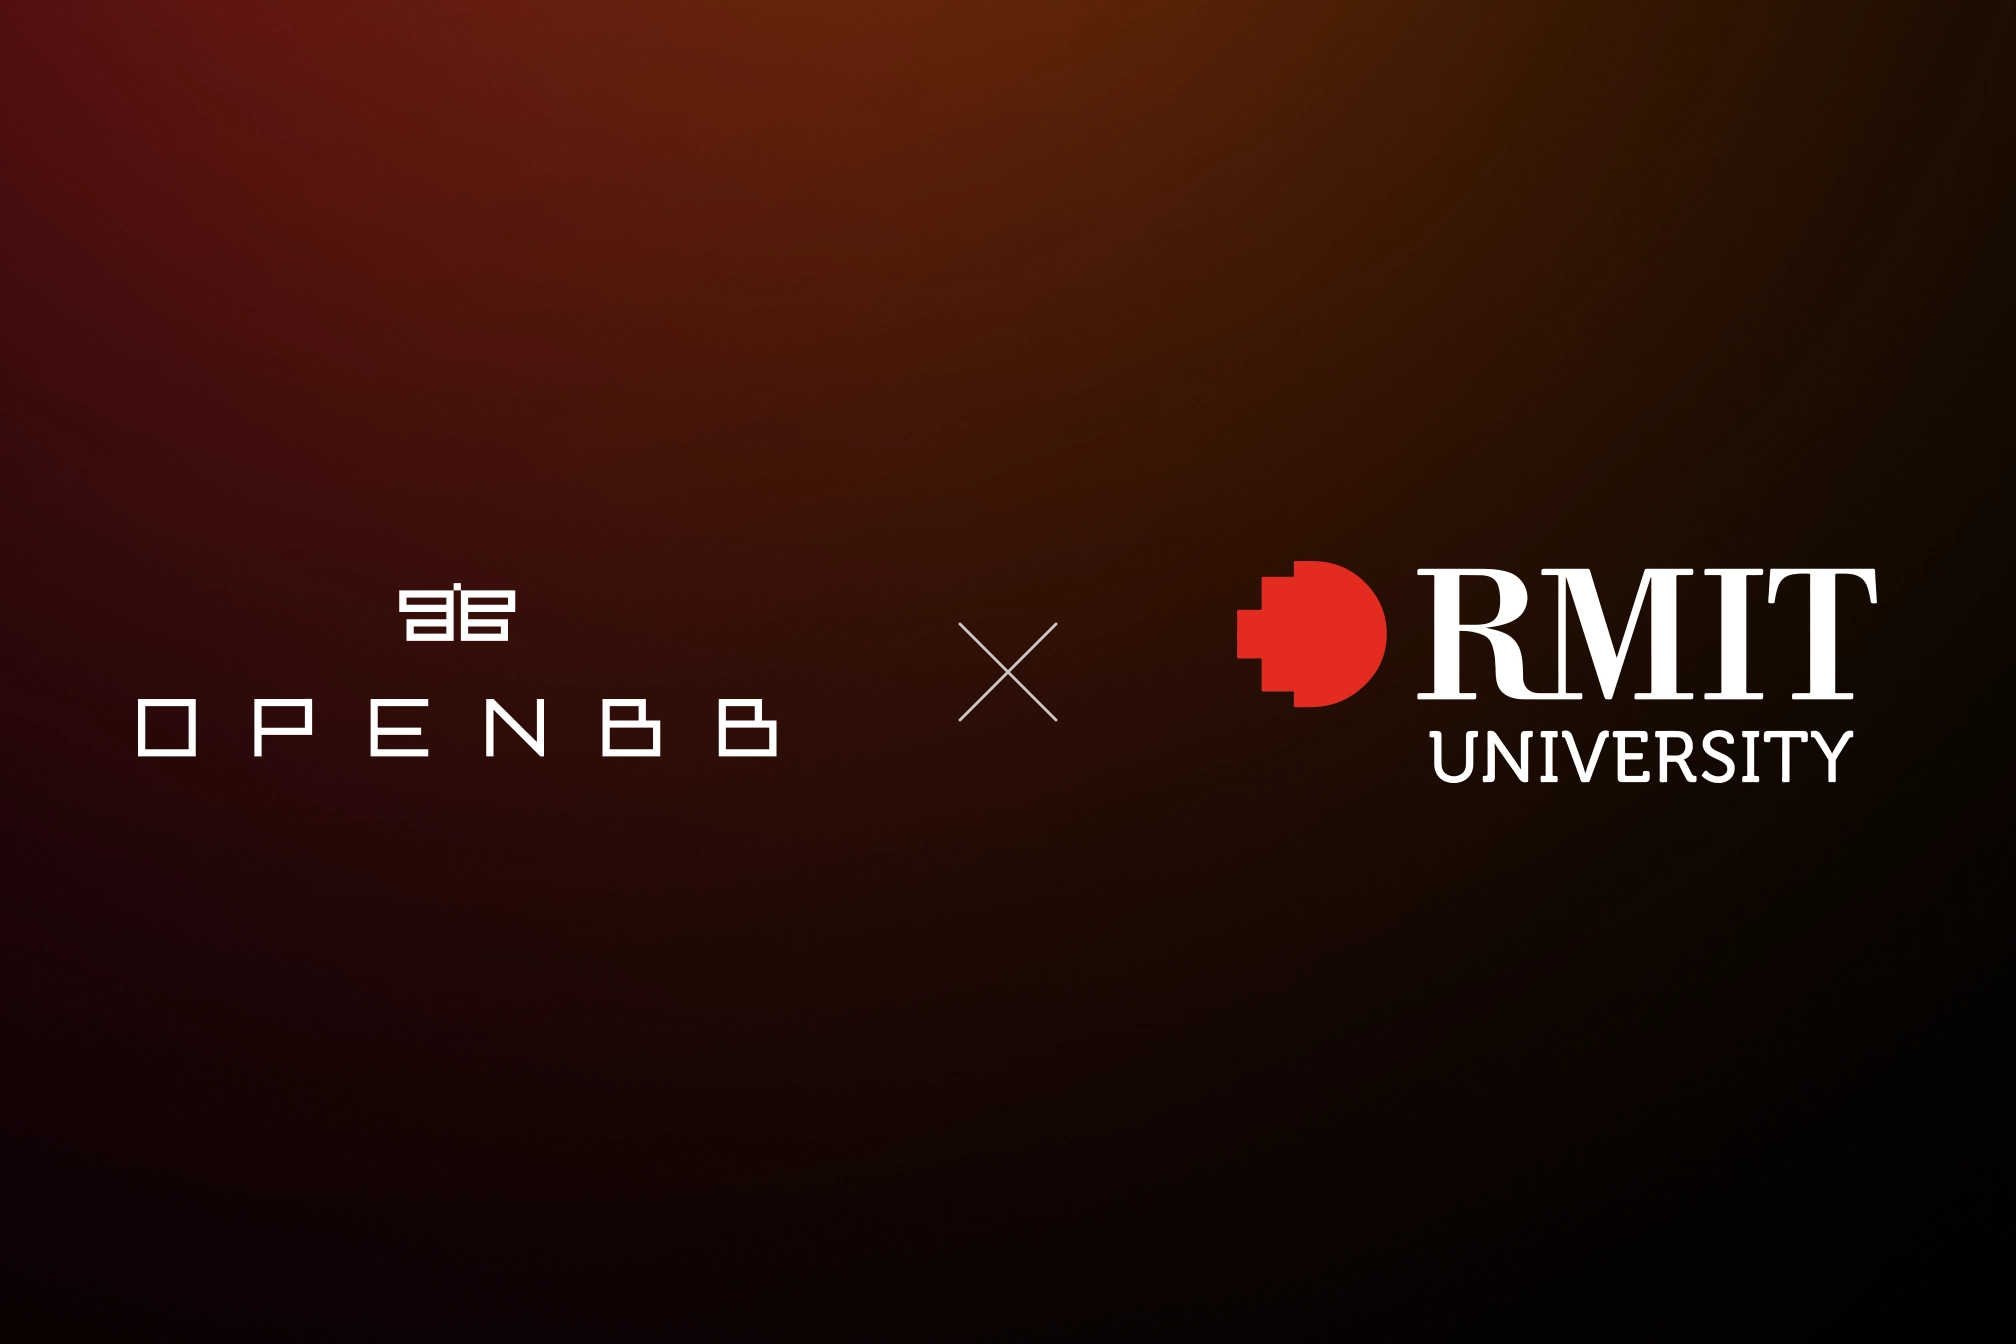 OpenBB collaborates with students from the RMIT University of Australia